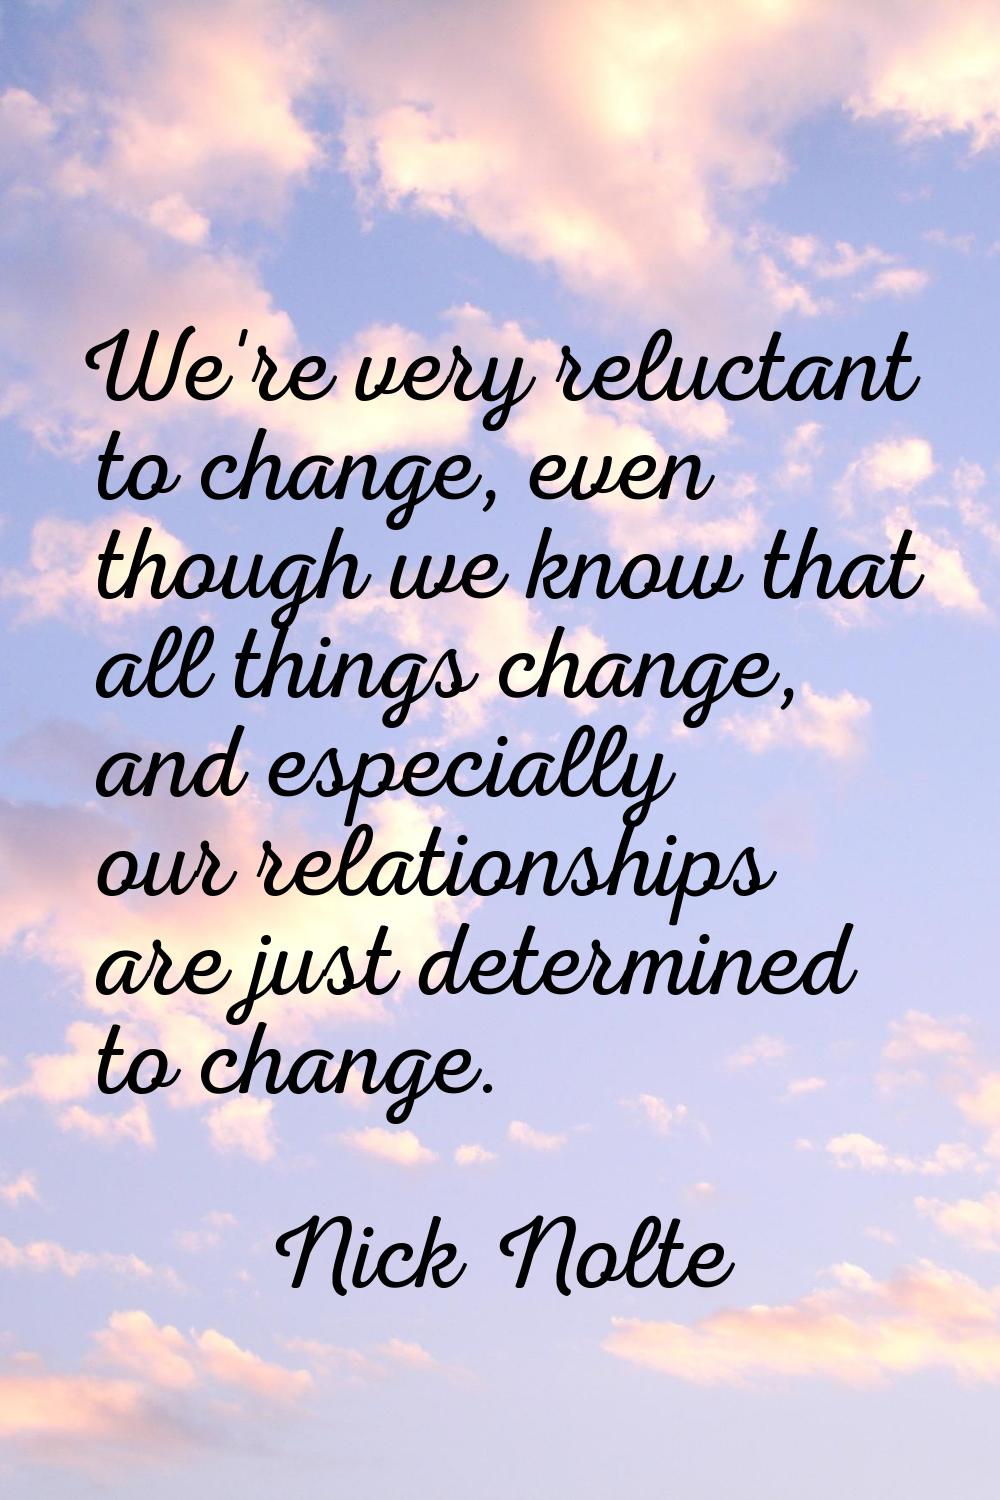 We're very reluctant to change, even though we know that all things change, and especially our rela